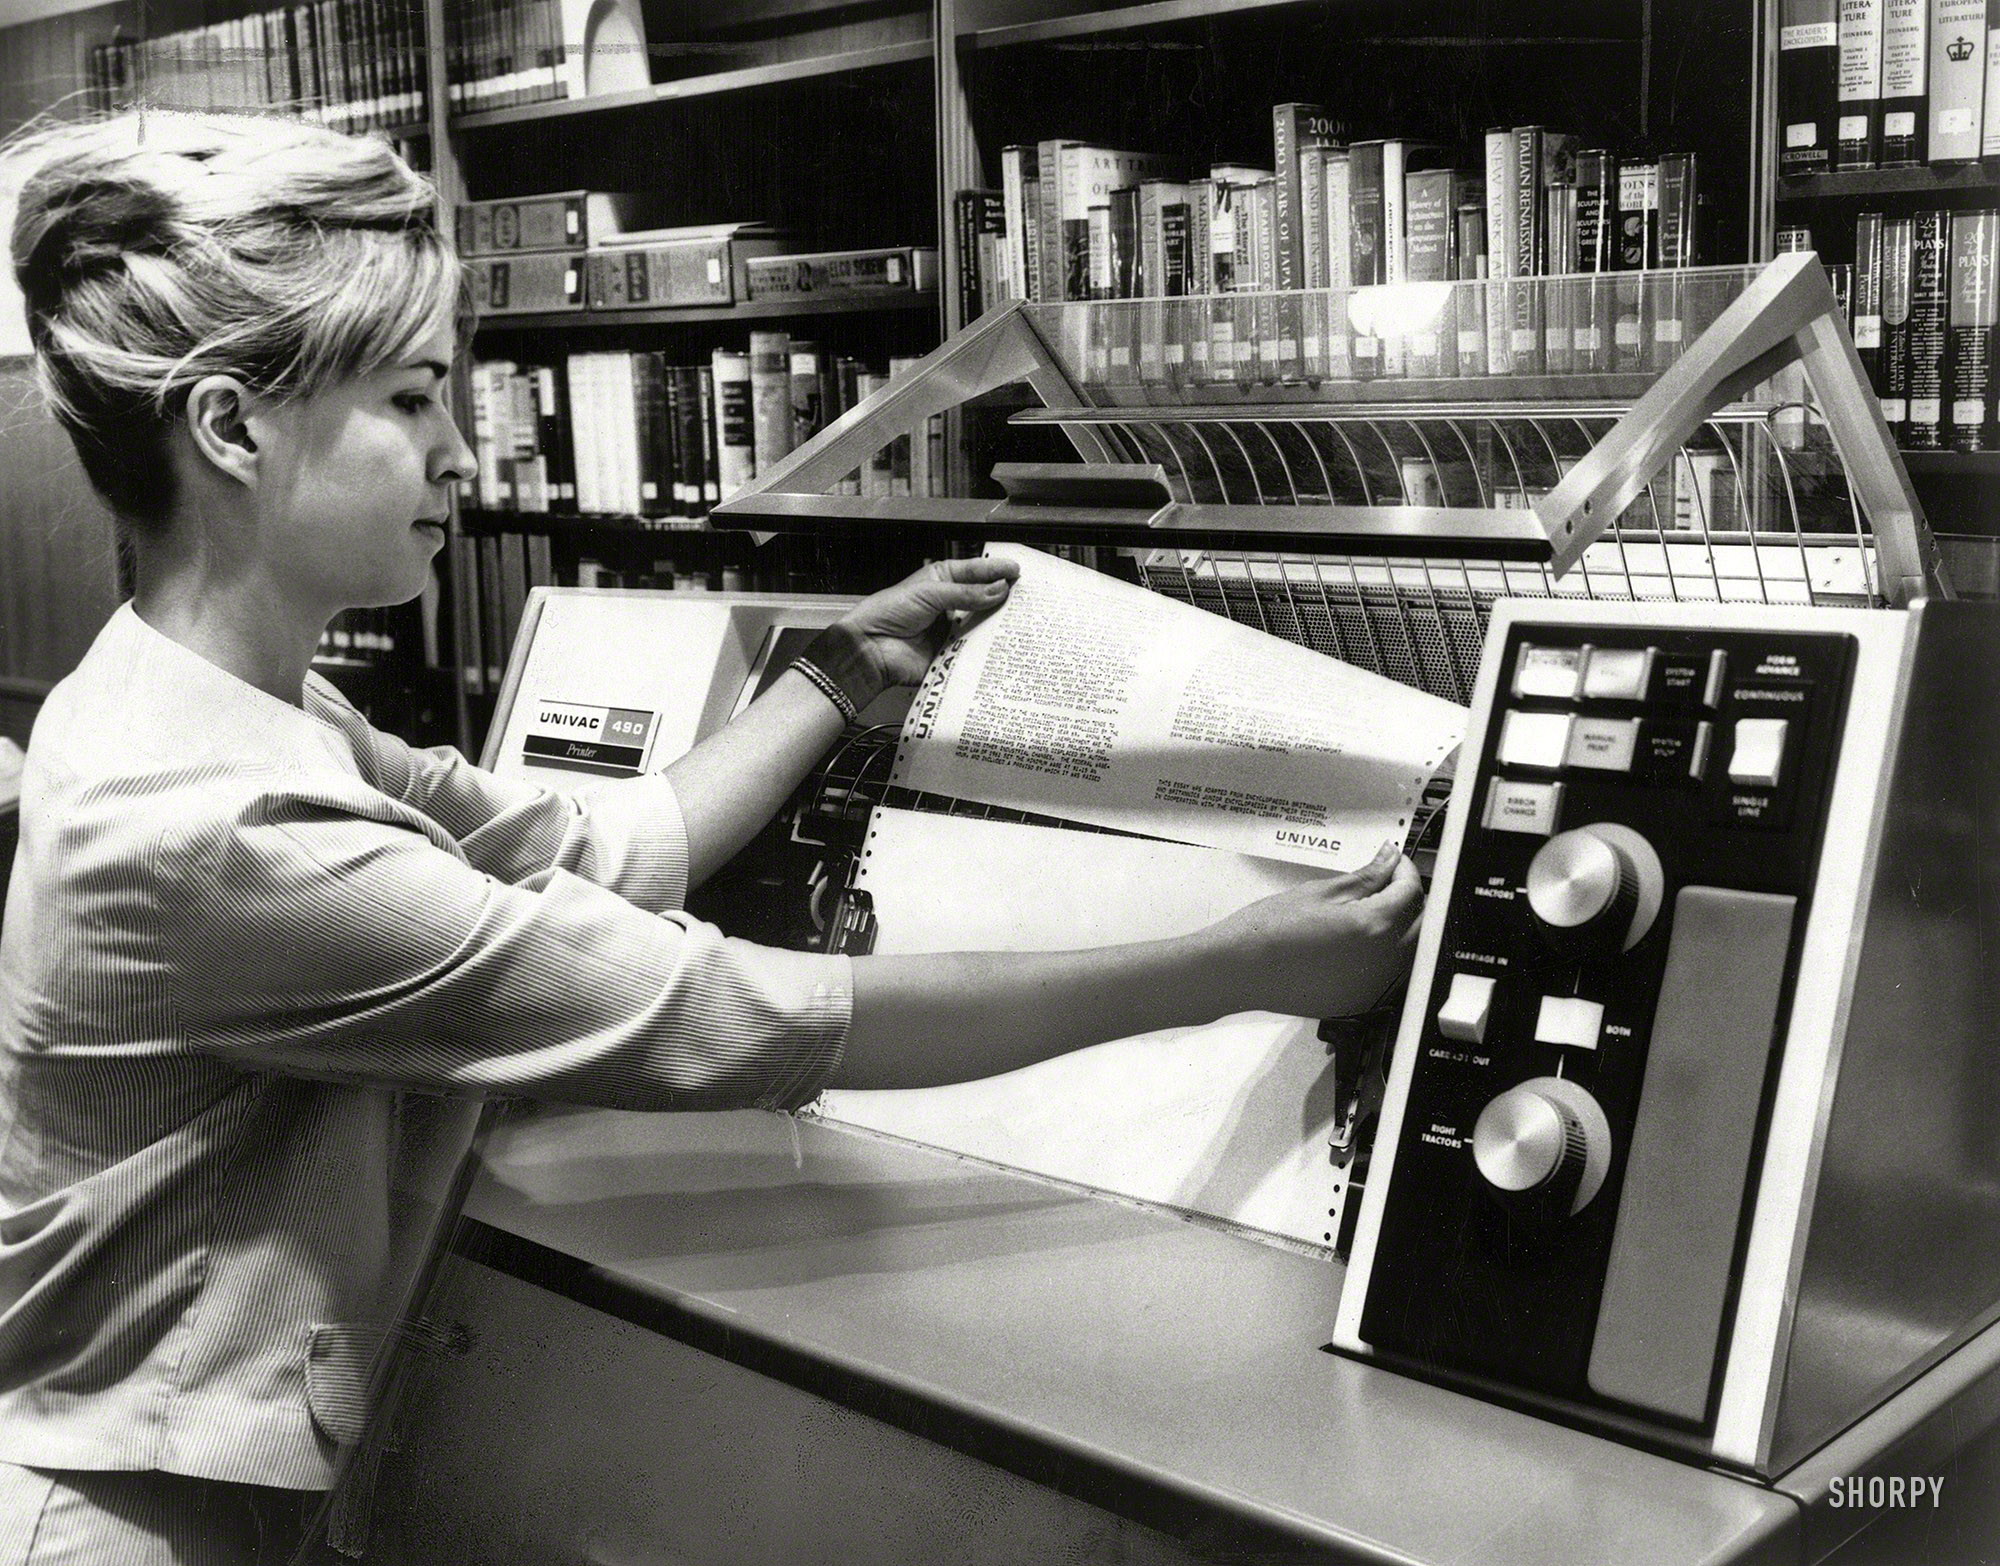 1966. "To the rescue. Many librarians believe computers are the only means to effectively cope with their bulging bookshelves." New York World-Telegram and Sun Newspaper Photograph Collection, Library of Congress. View full size.